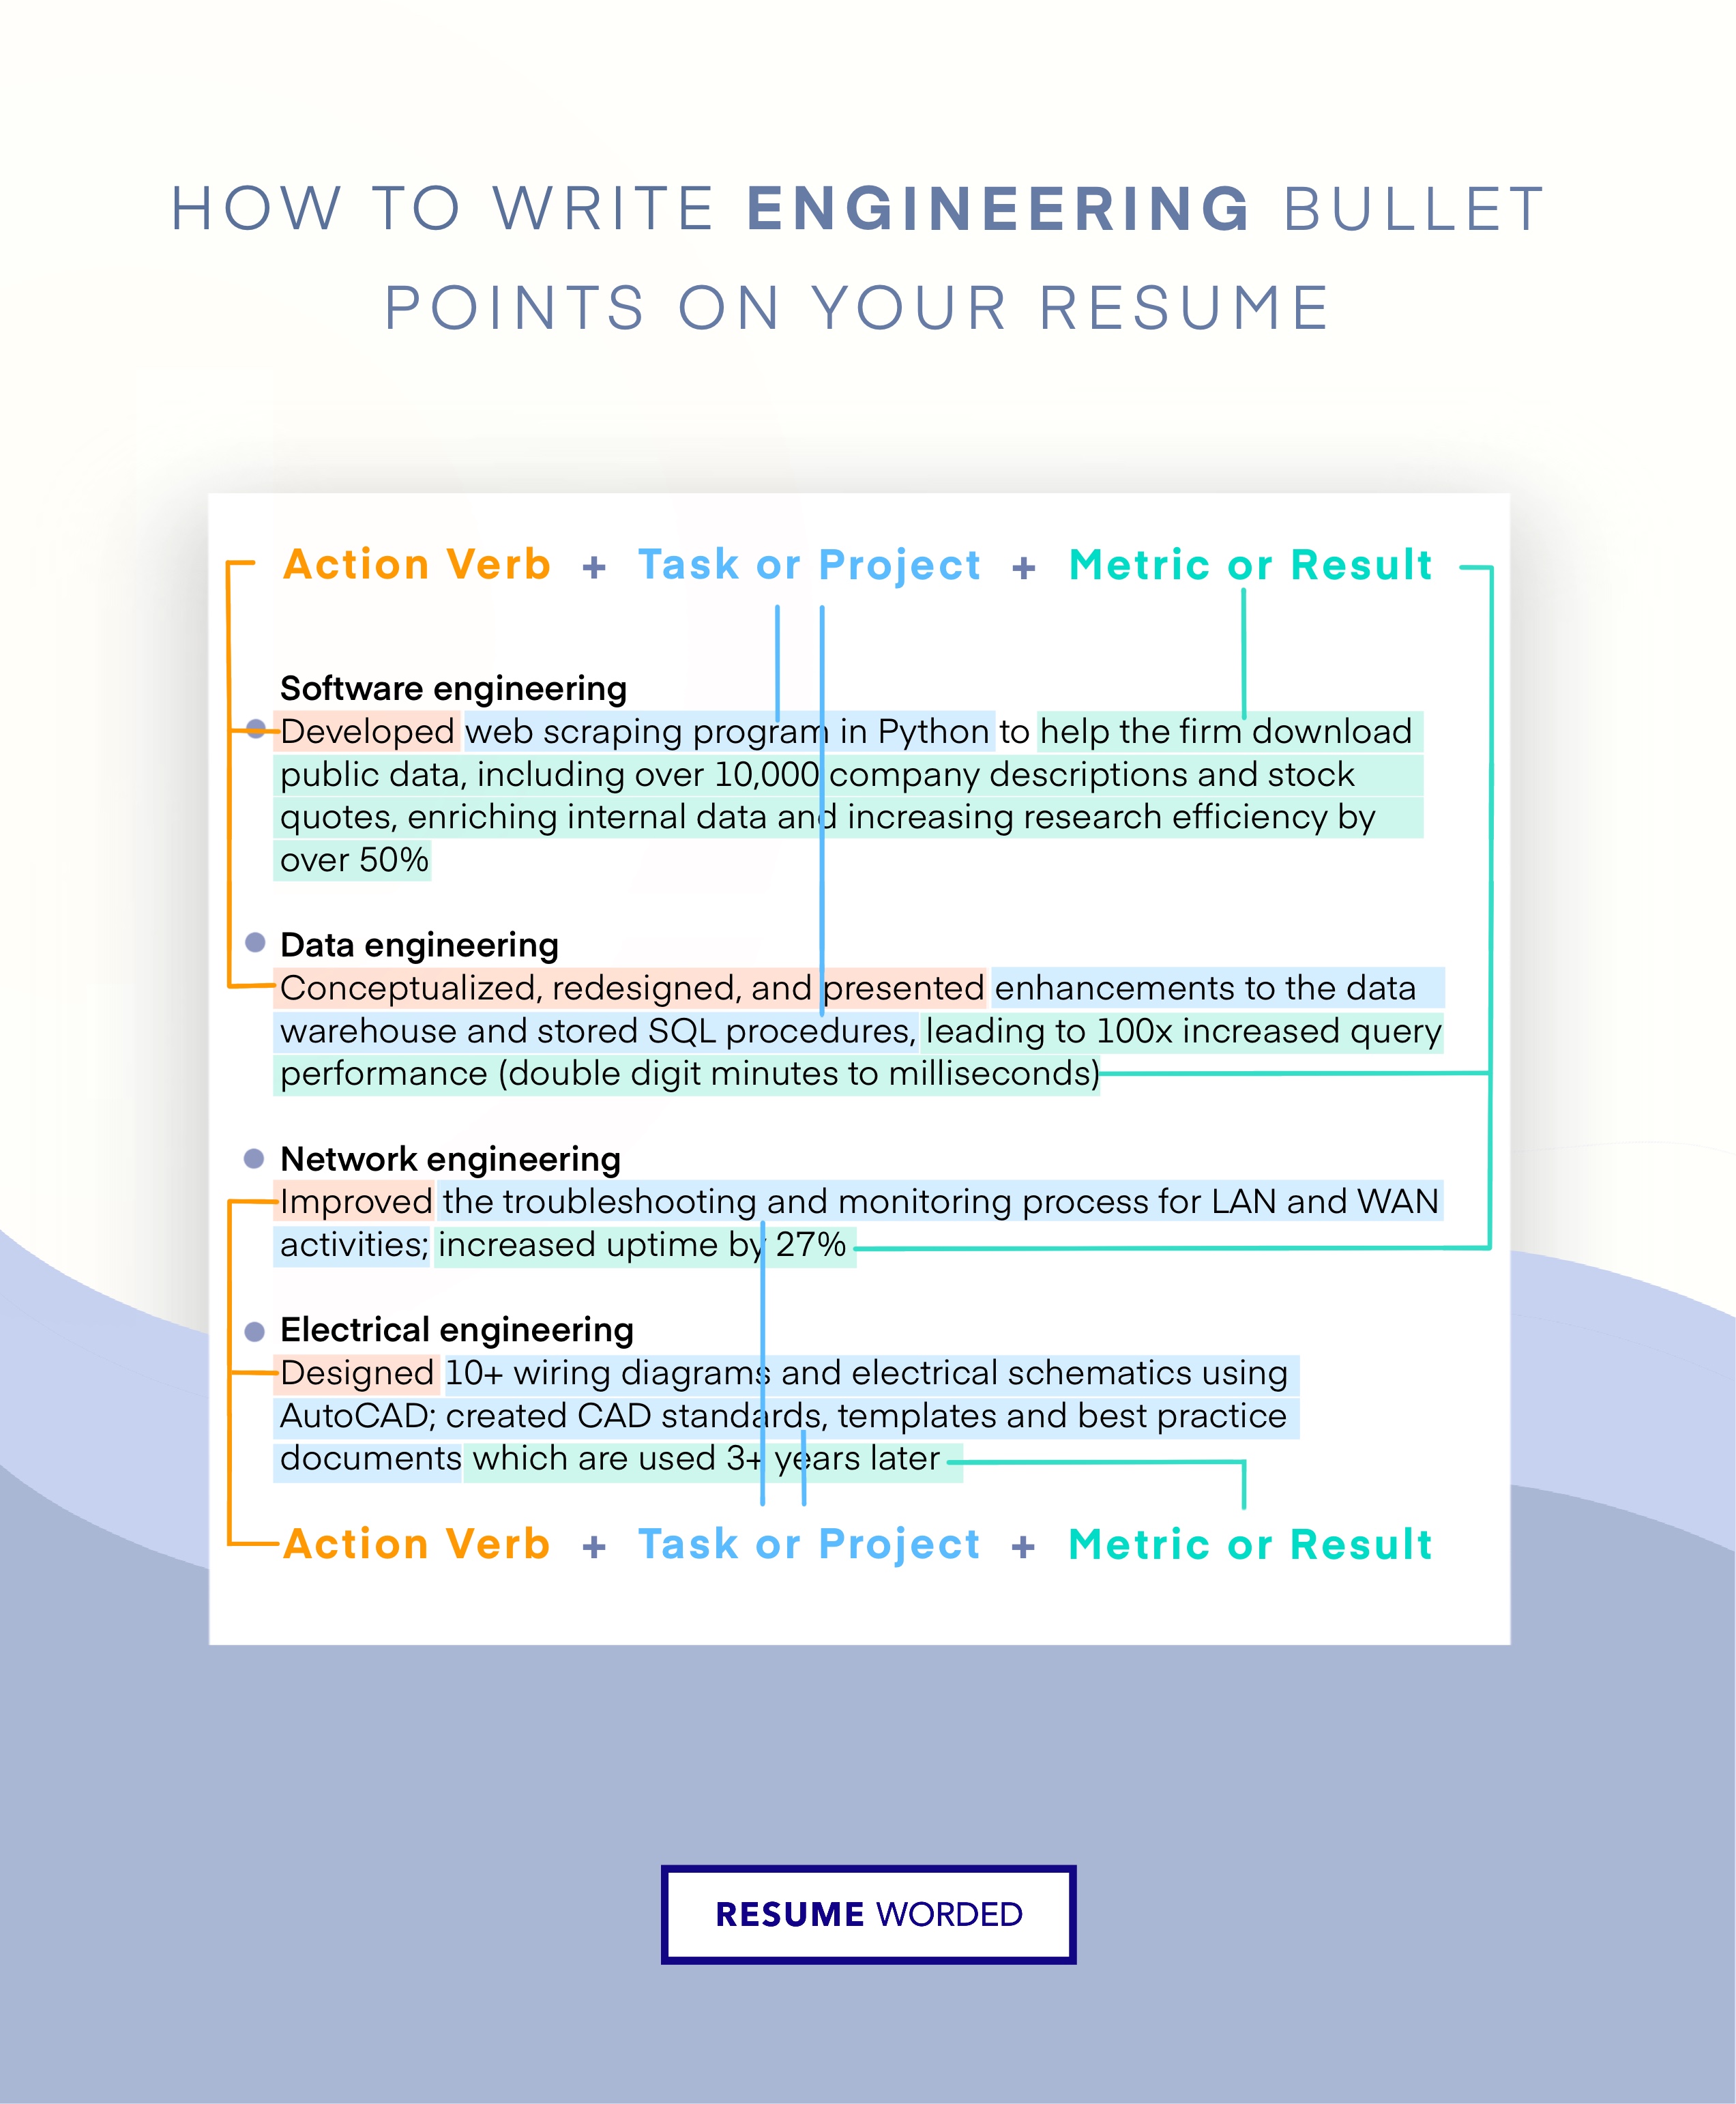 Display technical competencies - E-Learning Designer  CV